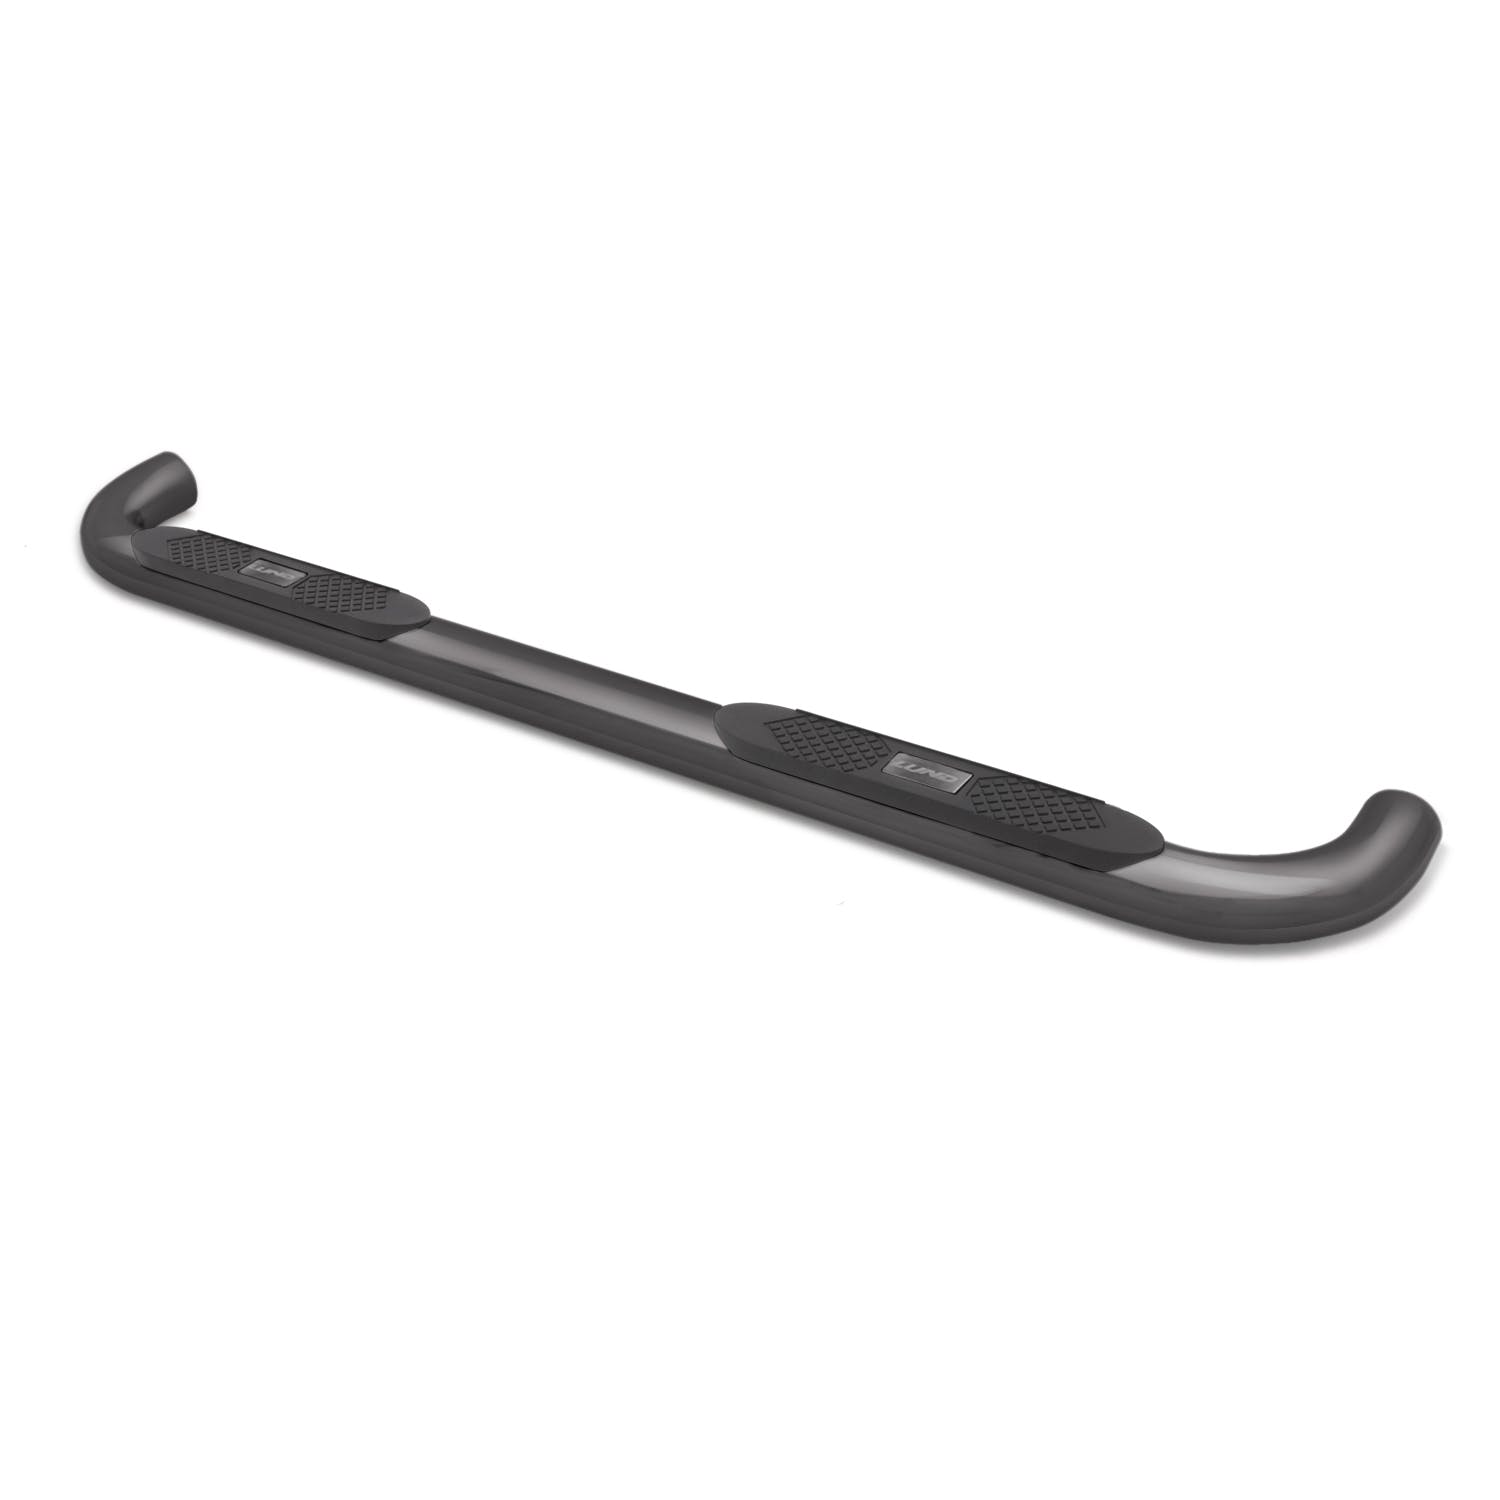 LUND 23487363 4 Inch Oval Curved Nerf Bar - Black 4 In OVAL CURVED STEEL